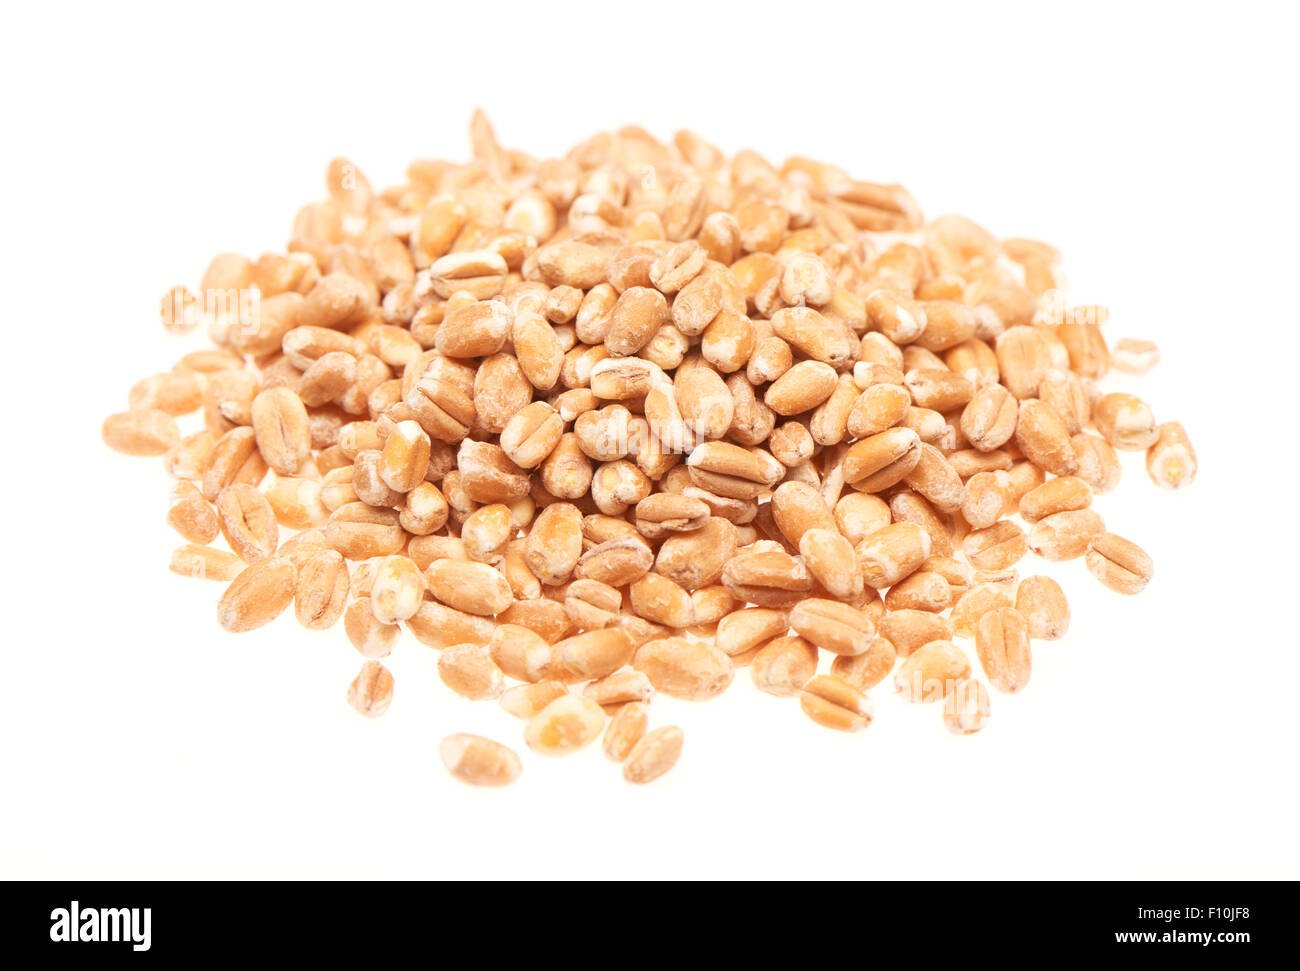 Pile of oats isolated on the white background Stock Photo